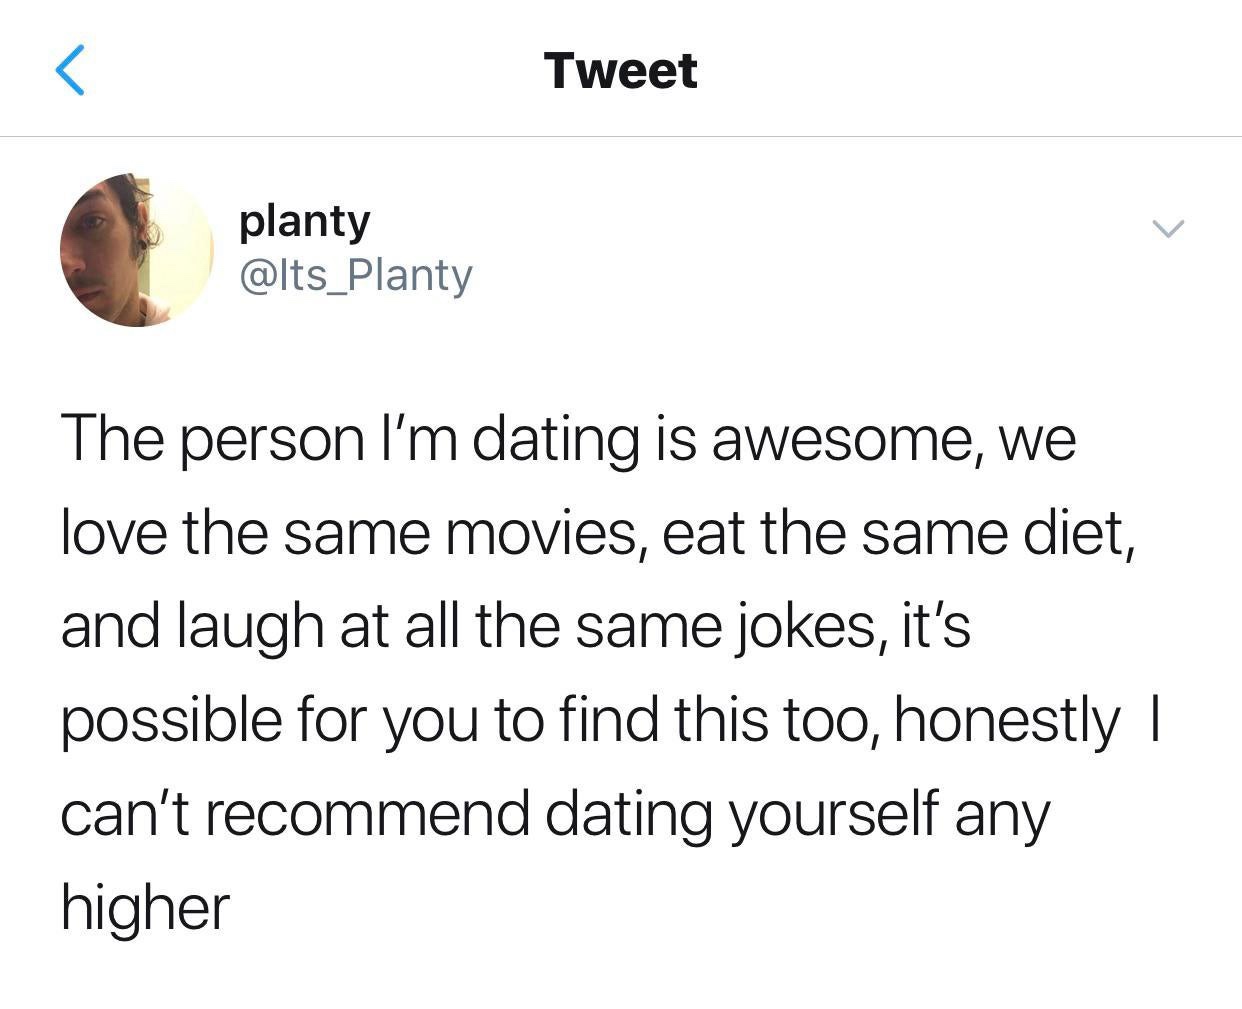 angle - Tweet planty The person I'm dating is awesome, we love the same movies, eat the same diet, and laugh at all the same jokes, it's possible for you to find this too, honestly | can't recommend dating yourself any higher